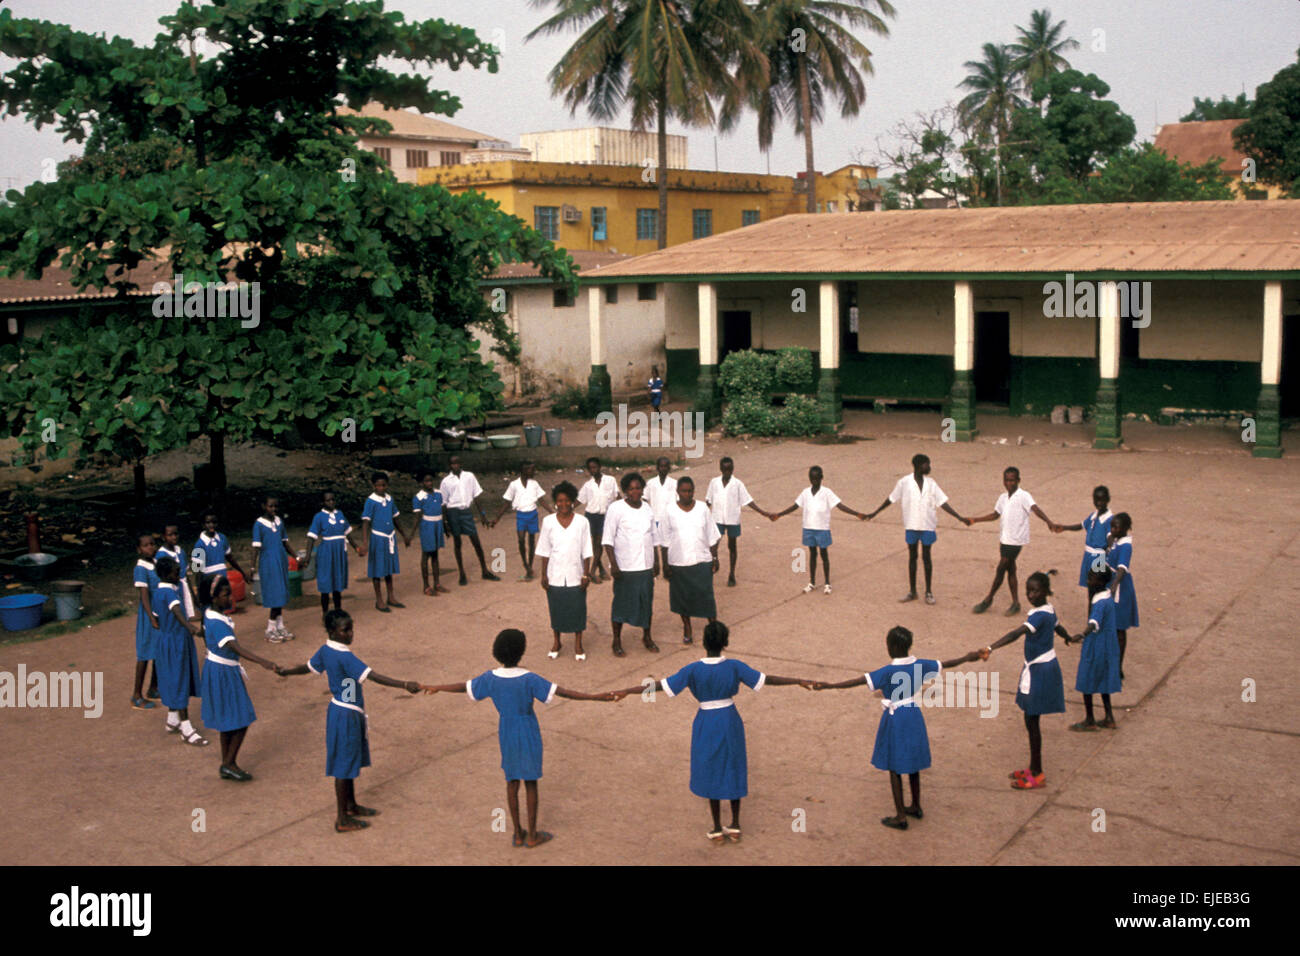 Pupils forming a circle outside a Catholic church school in Gambia, West Africa Stock Photo